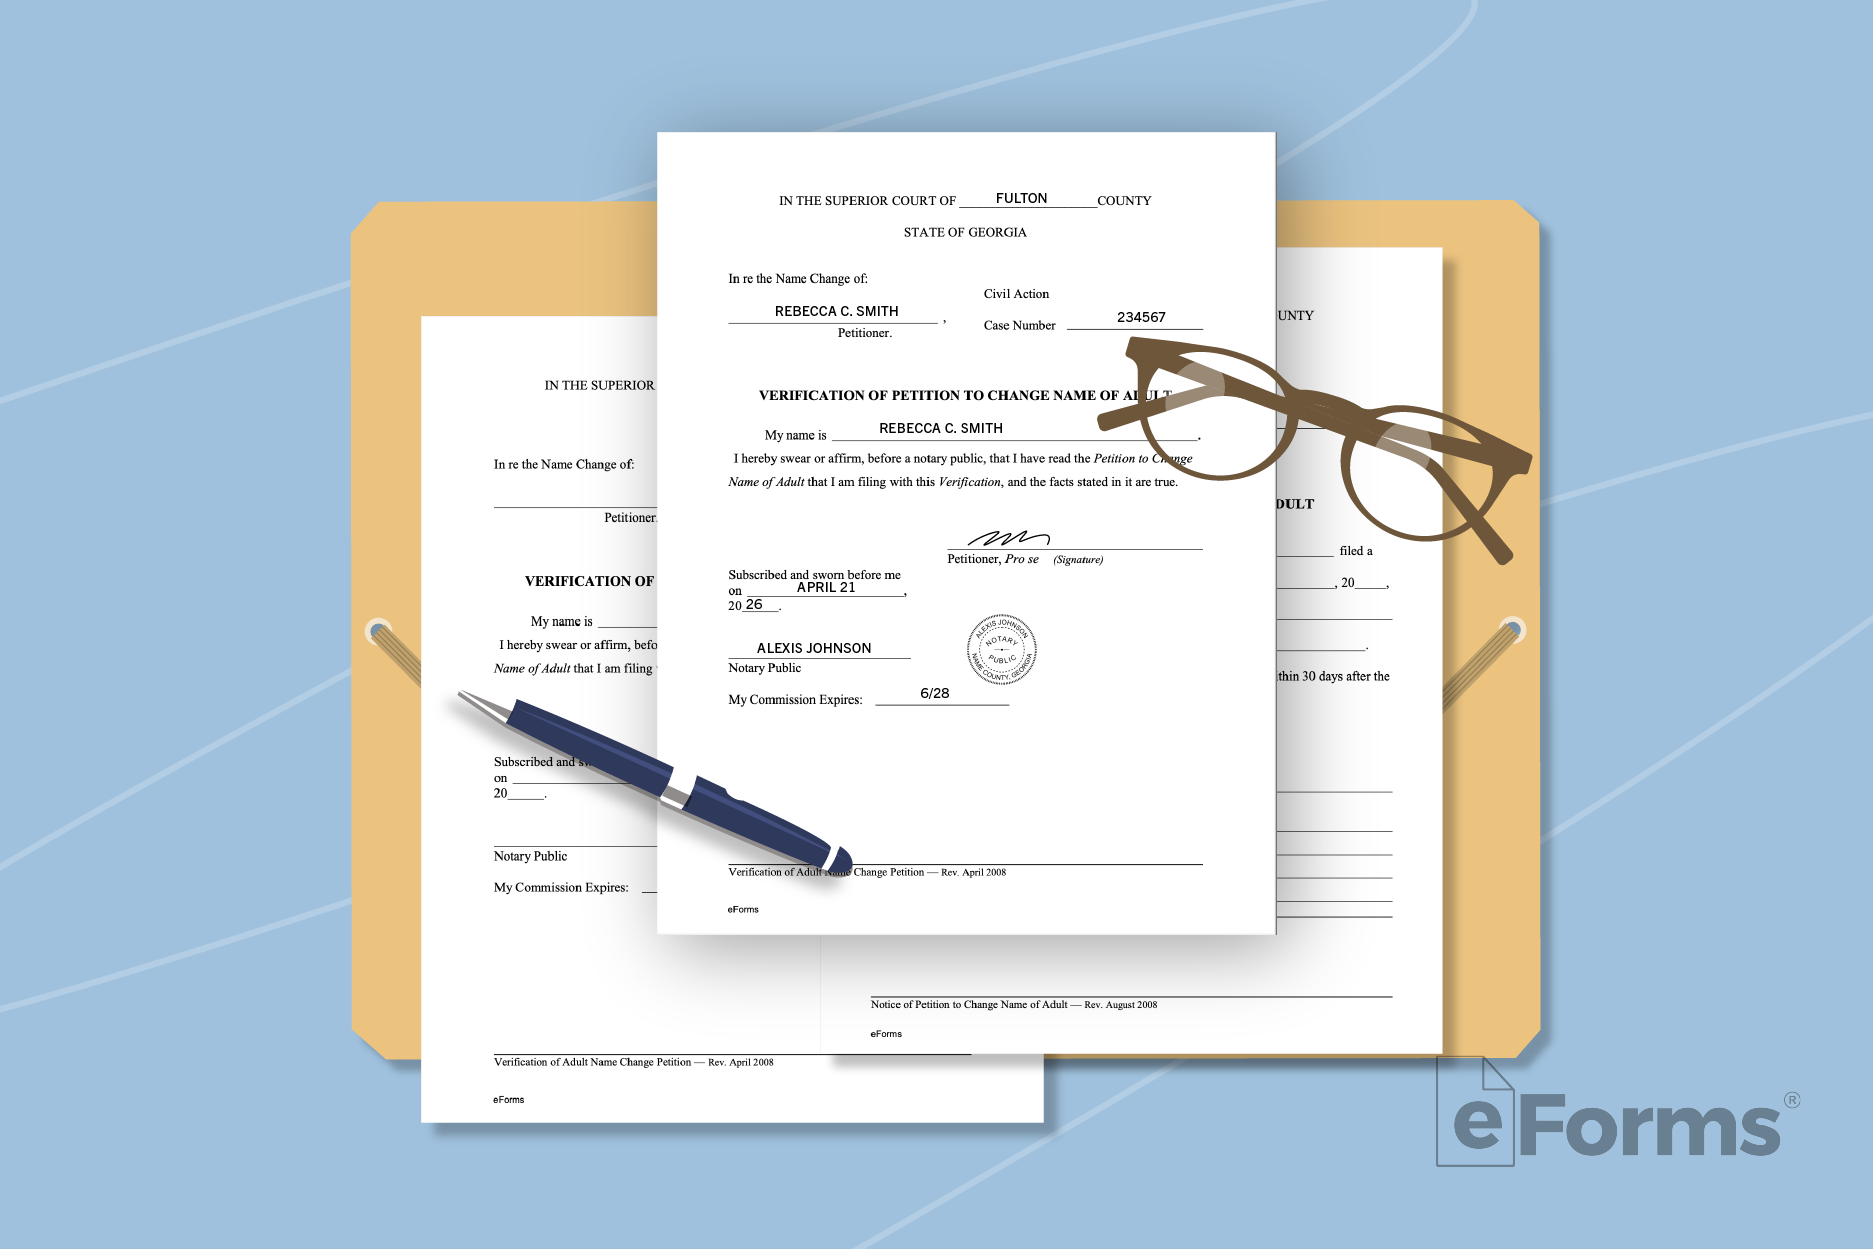 Forms placed on folder with pen and a pair of glasses.